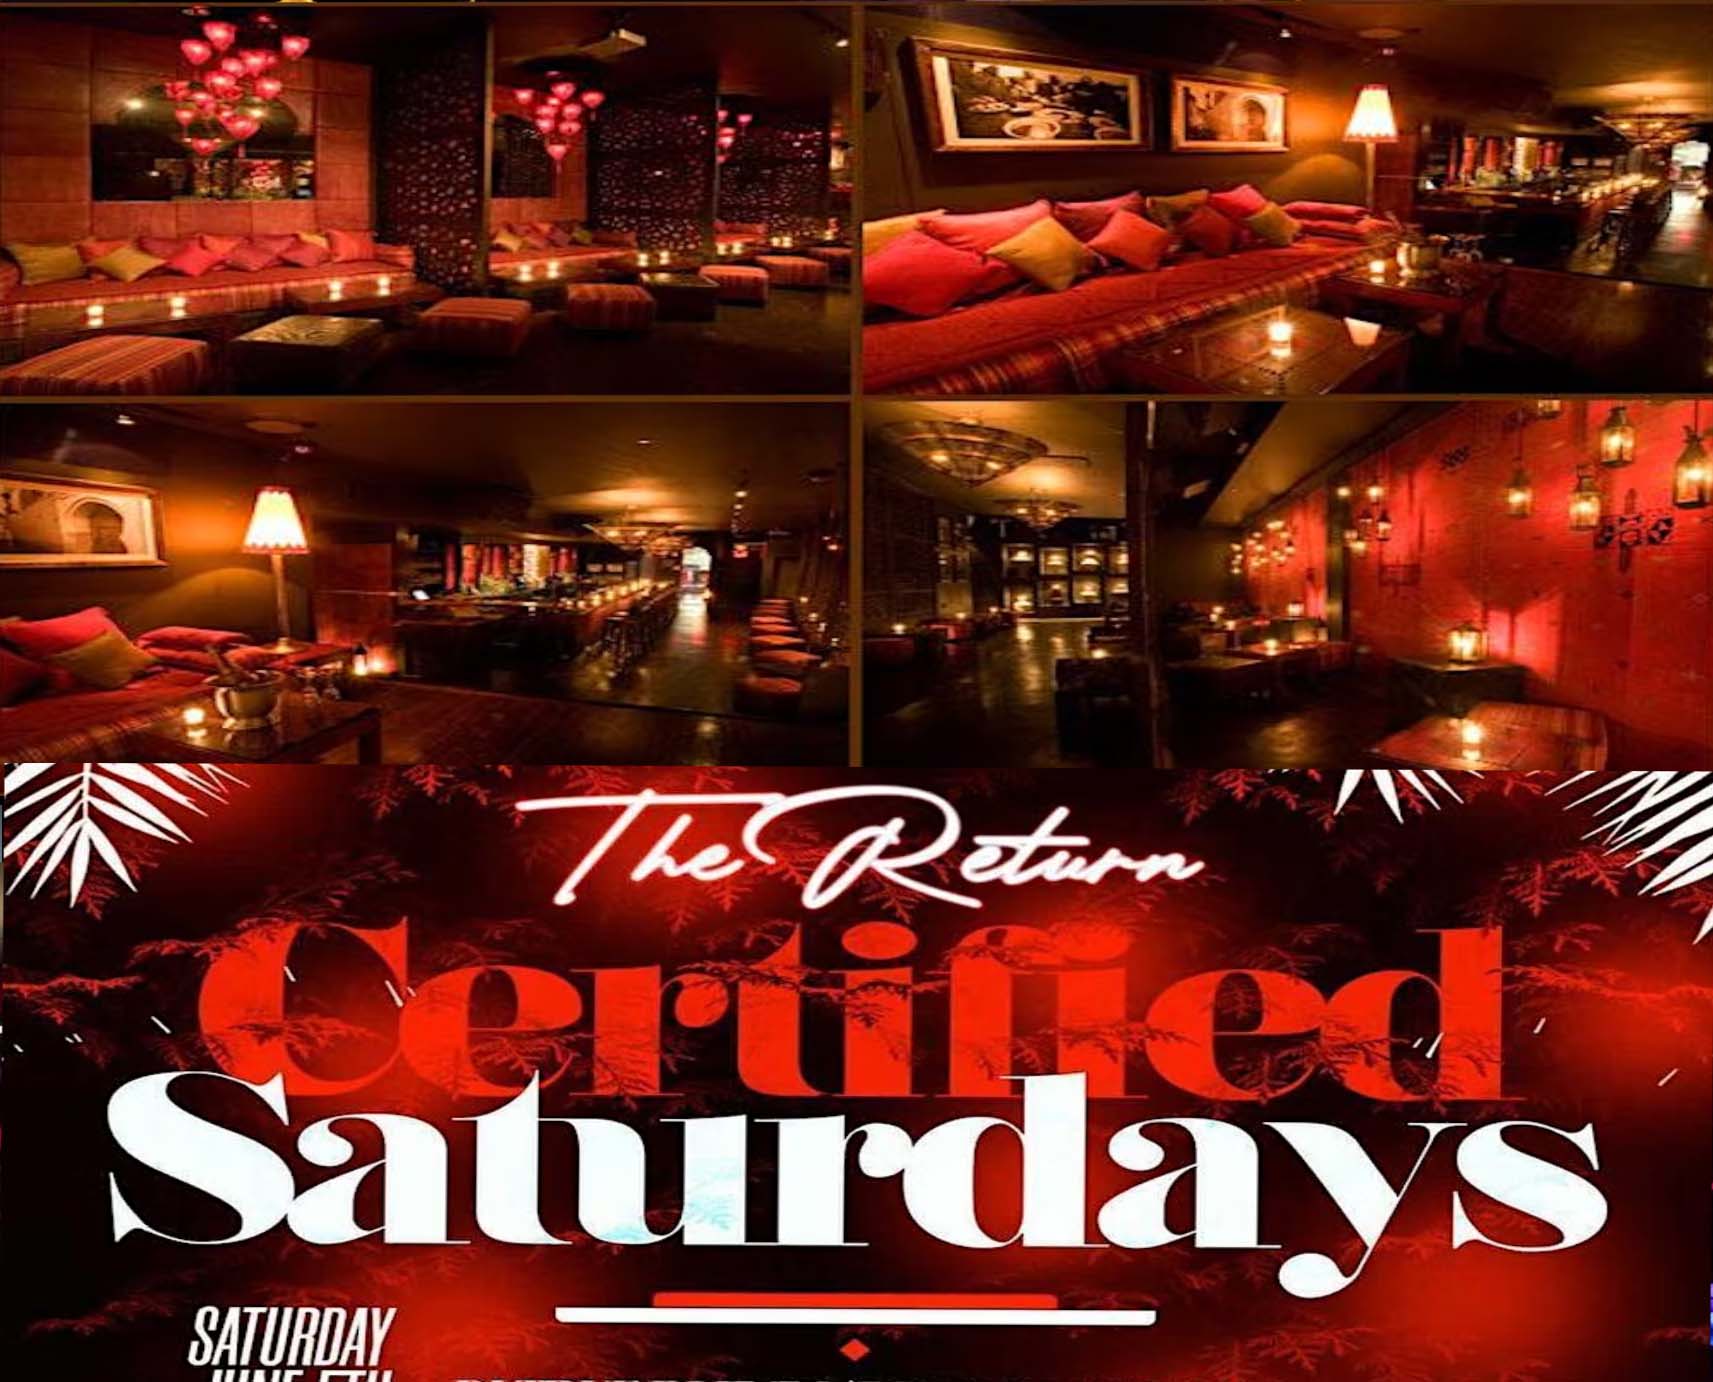 Certified Saturdays At Katra Lounge 1 Vibes Party in The City